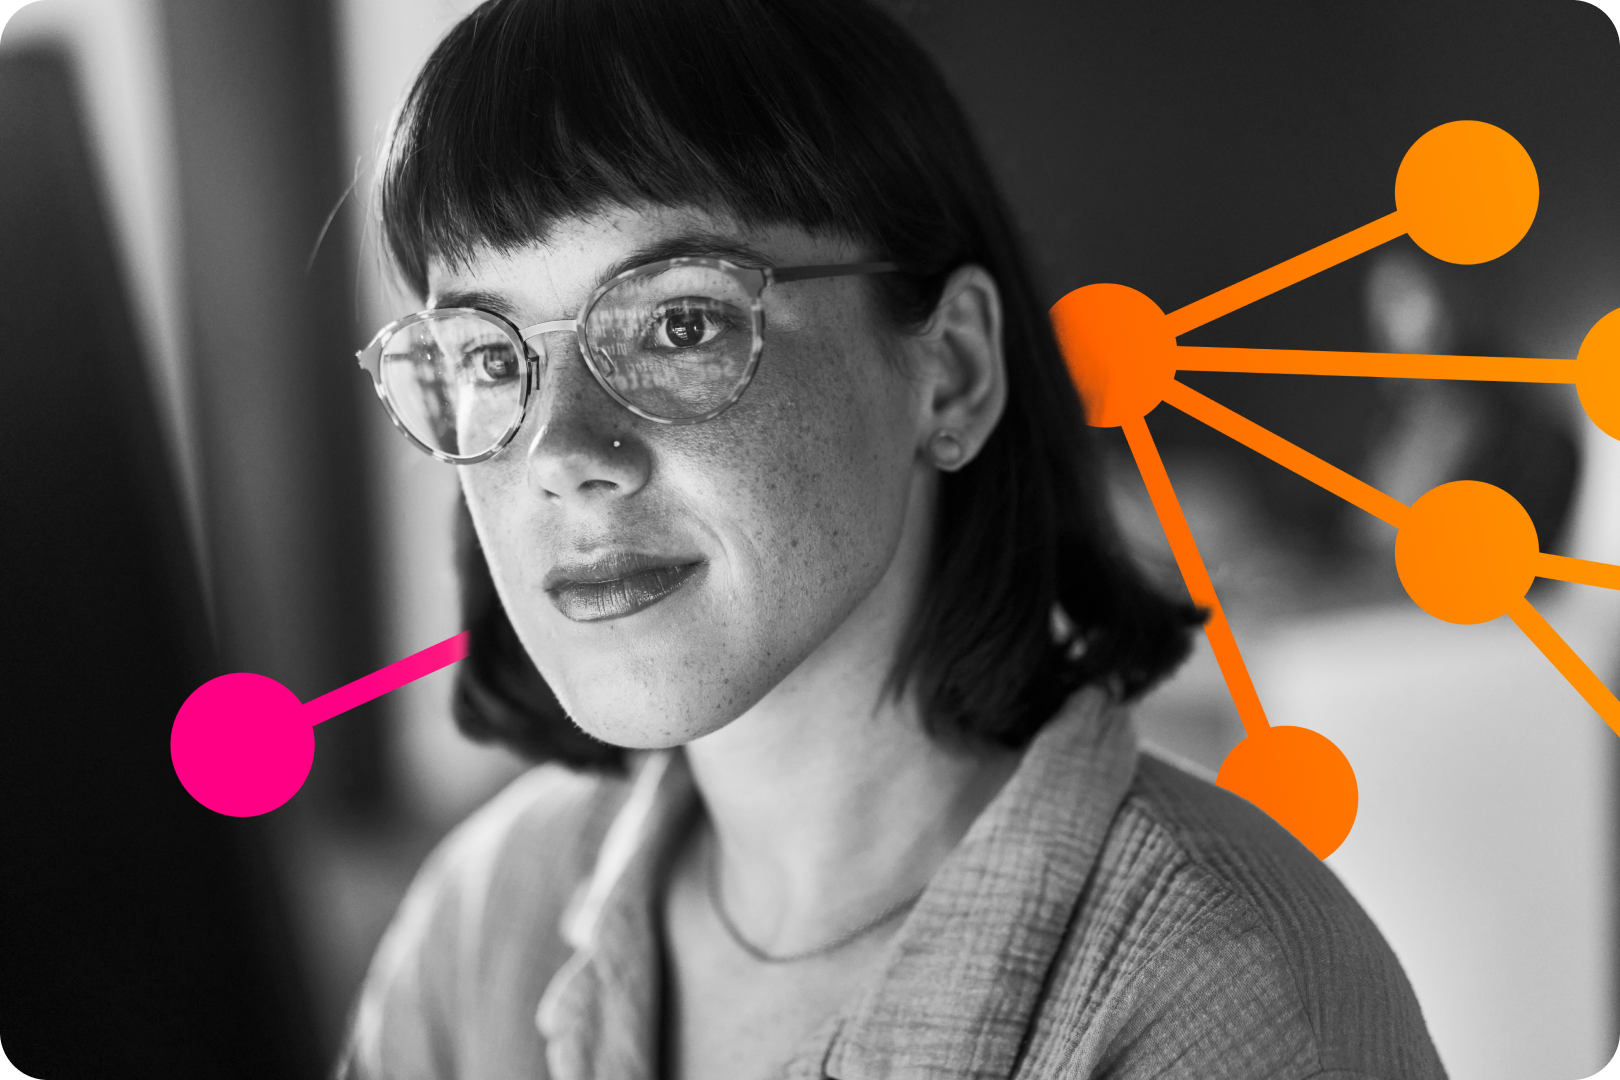 woman with glasses looks into the distance, behind her are pink and orange dots connected by lines